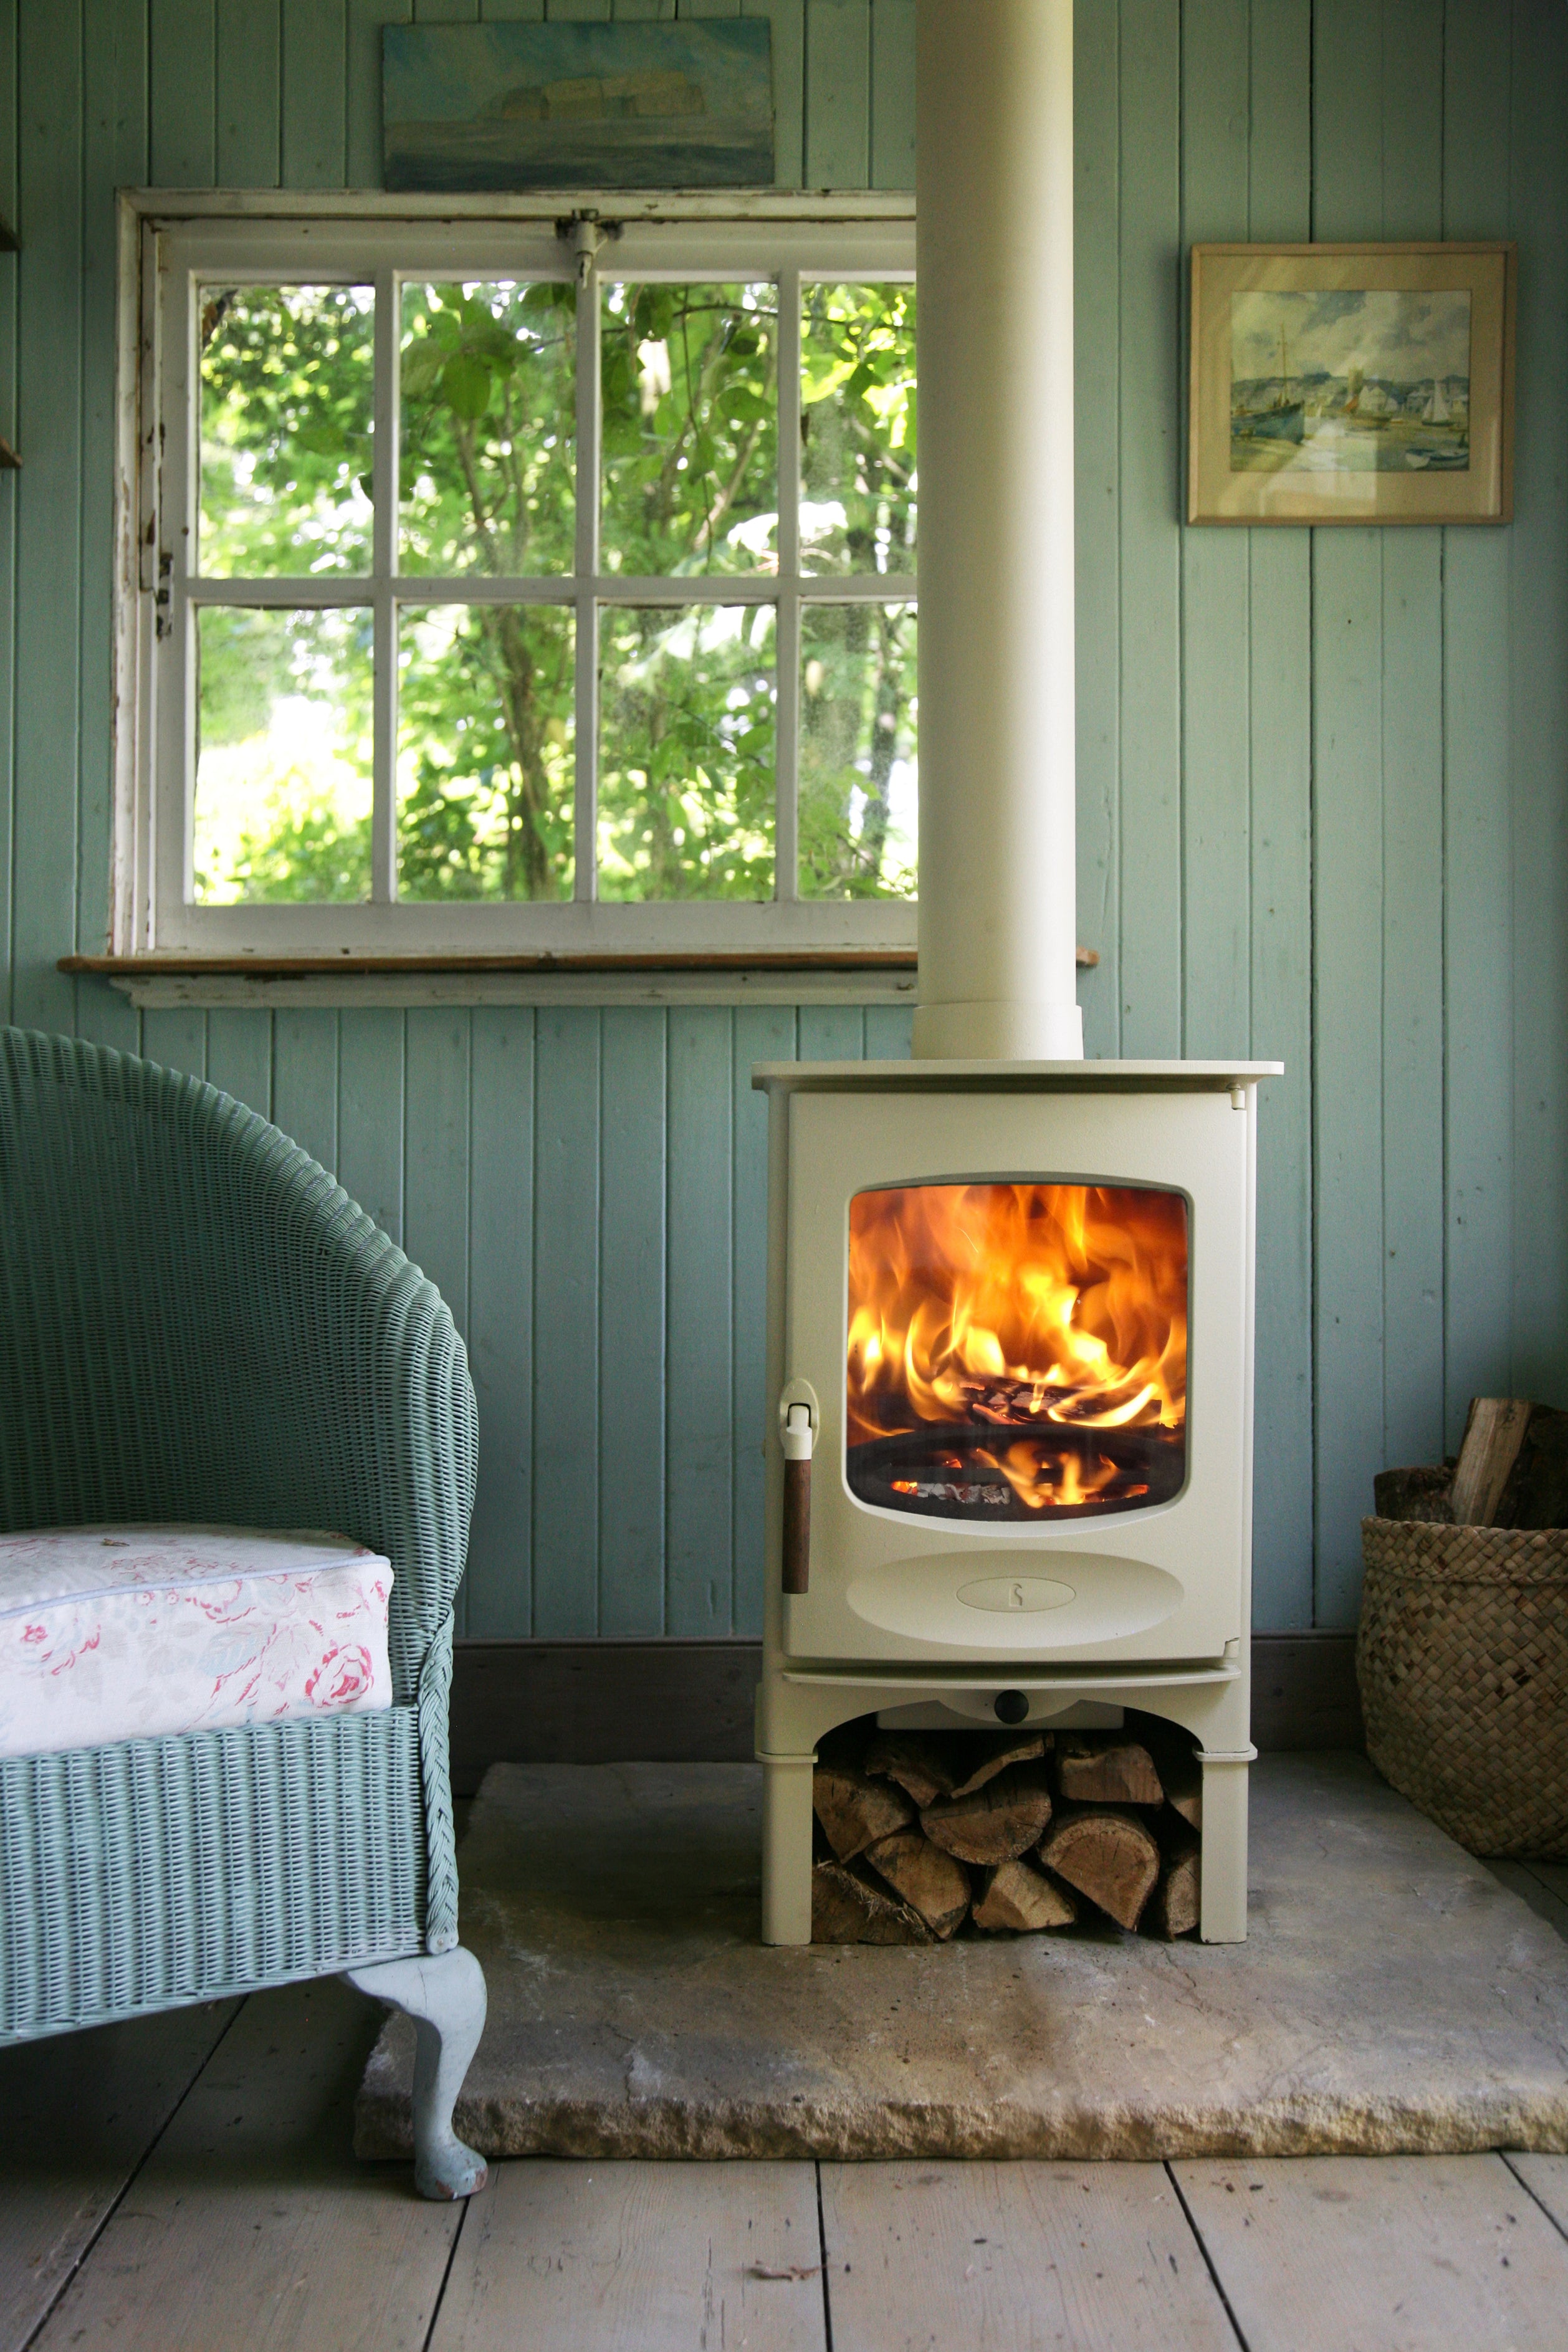 Your new wood burning stove